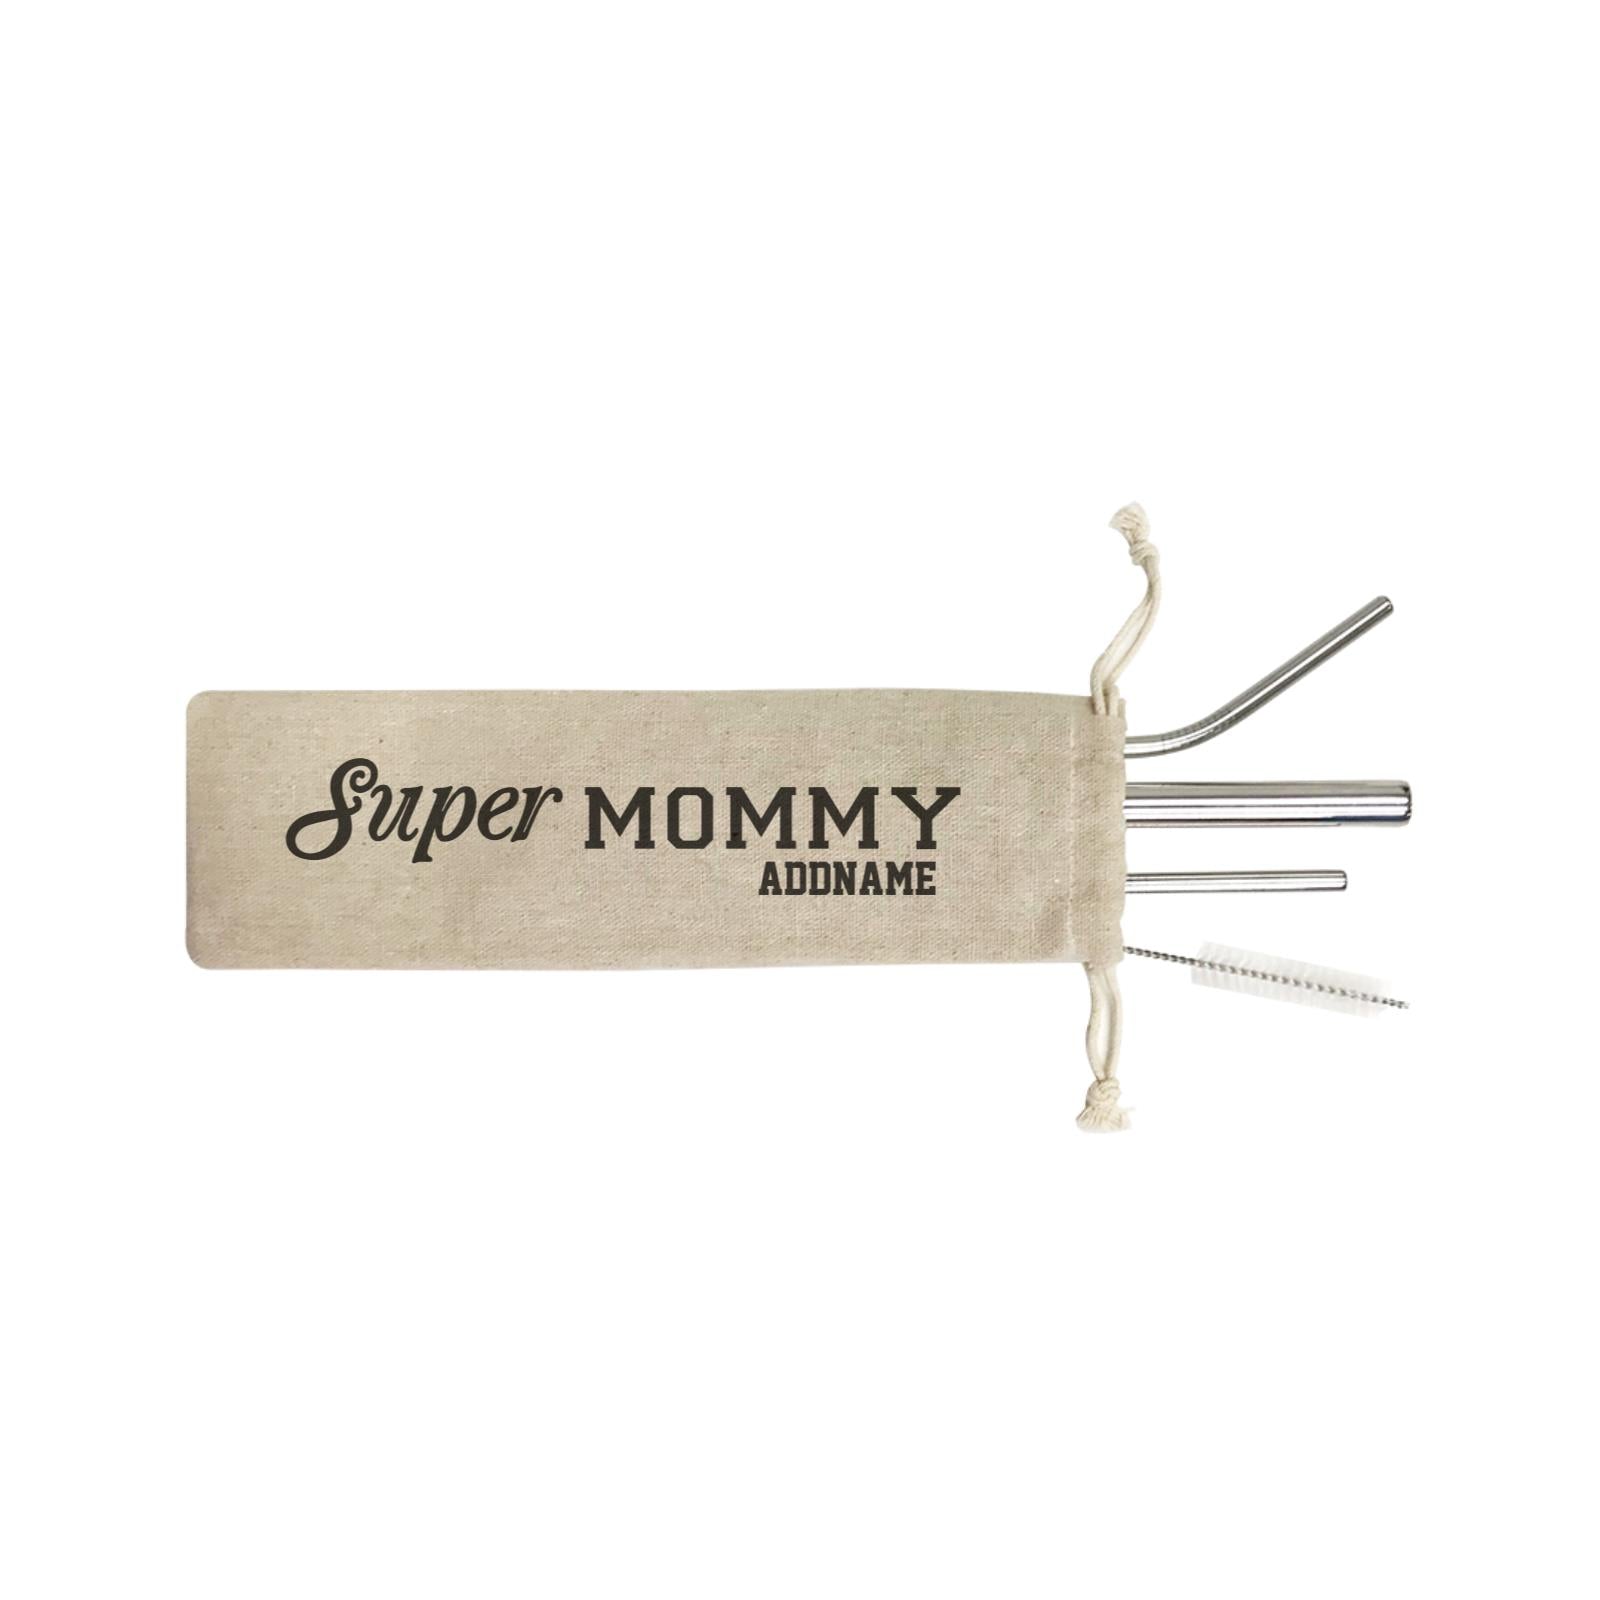 Super Definition Family Super Mommy Addname SB 4-In-1 Stainless Steel Straw Set in Satchel